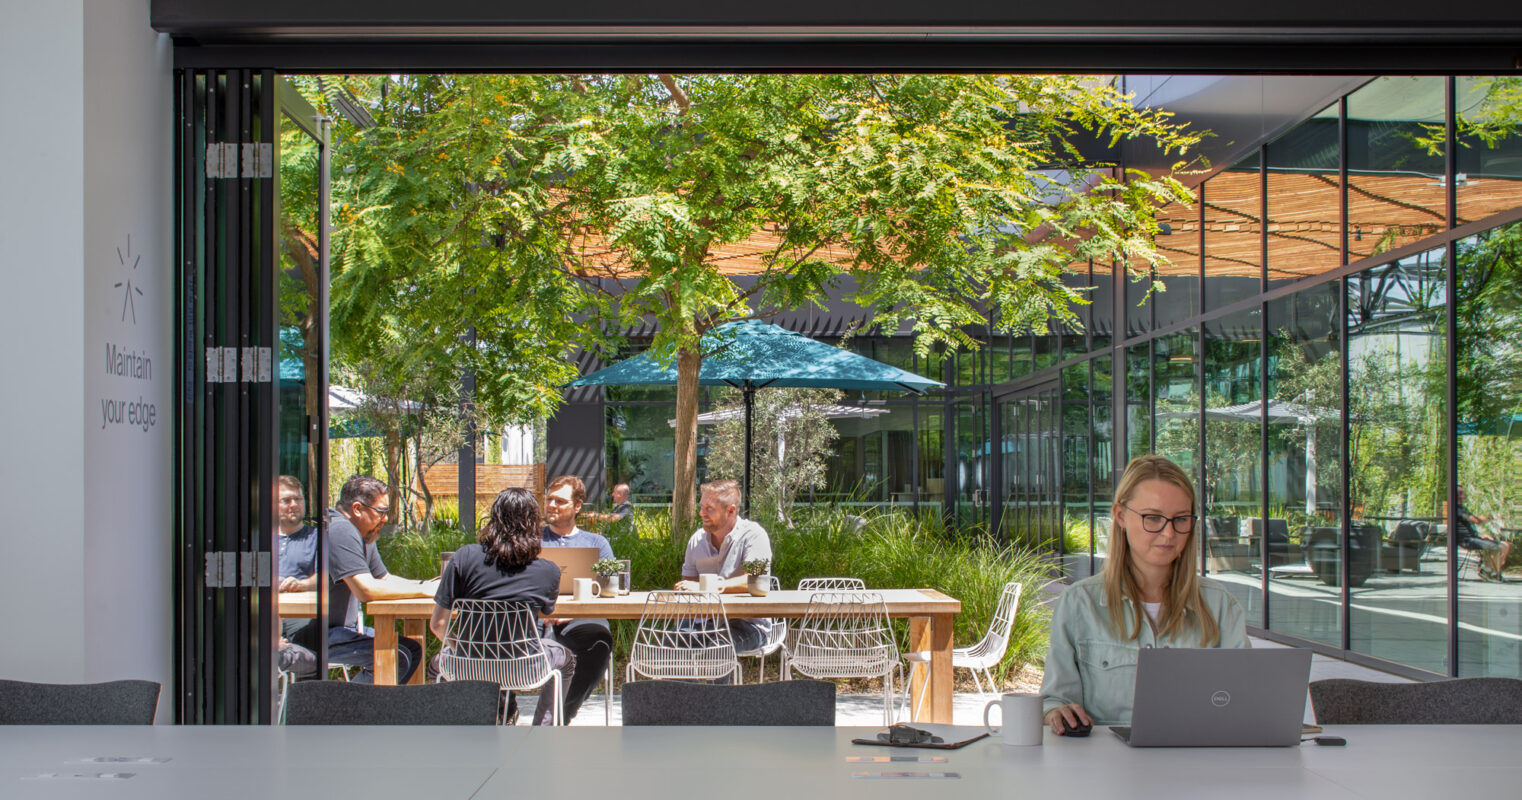 Professionals gather at a modern outdoor meeting space featuring minimalistic furniture and lush greenery, with a transparent glass facade integrating the interior office environment and the vibrant outdoor setting.